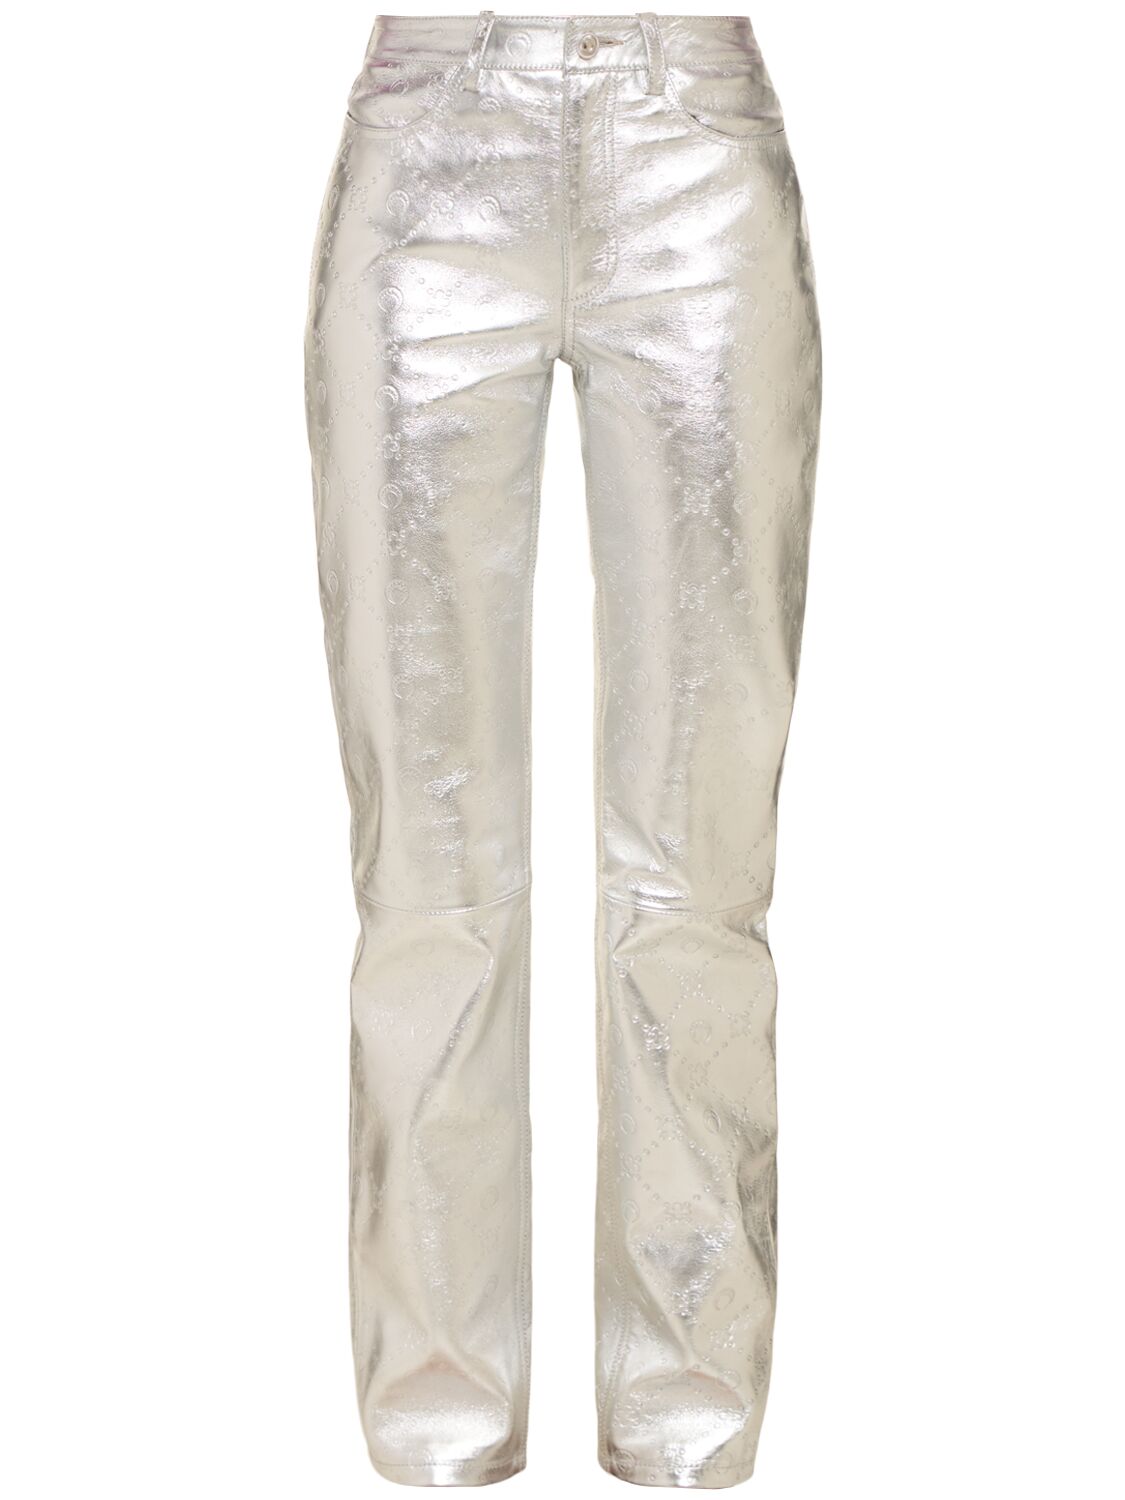 Marine Serre Laminated Leather Straight Leg Pants In Silver